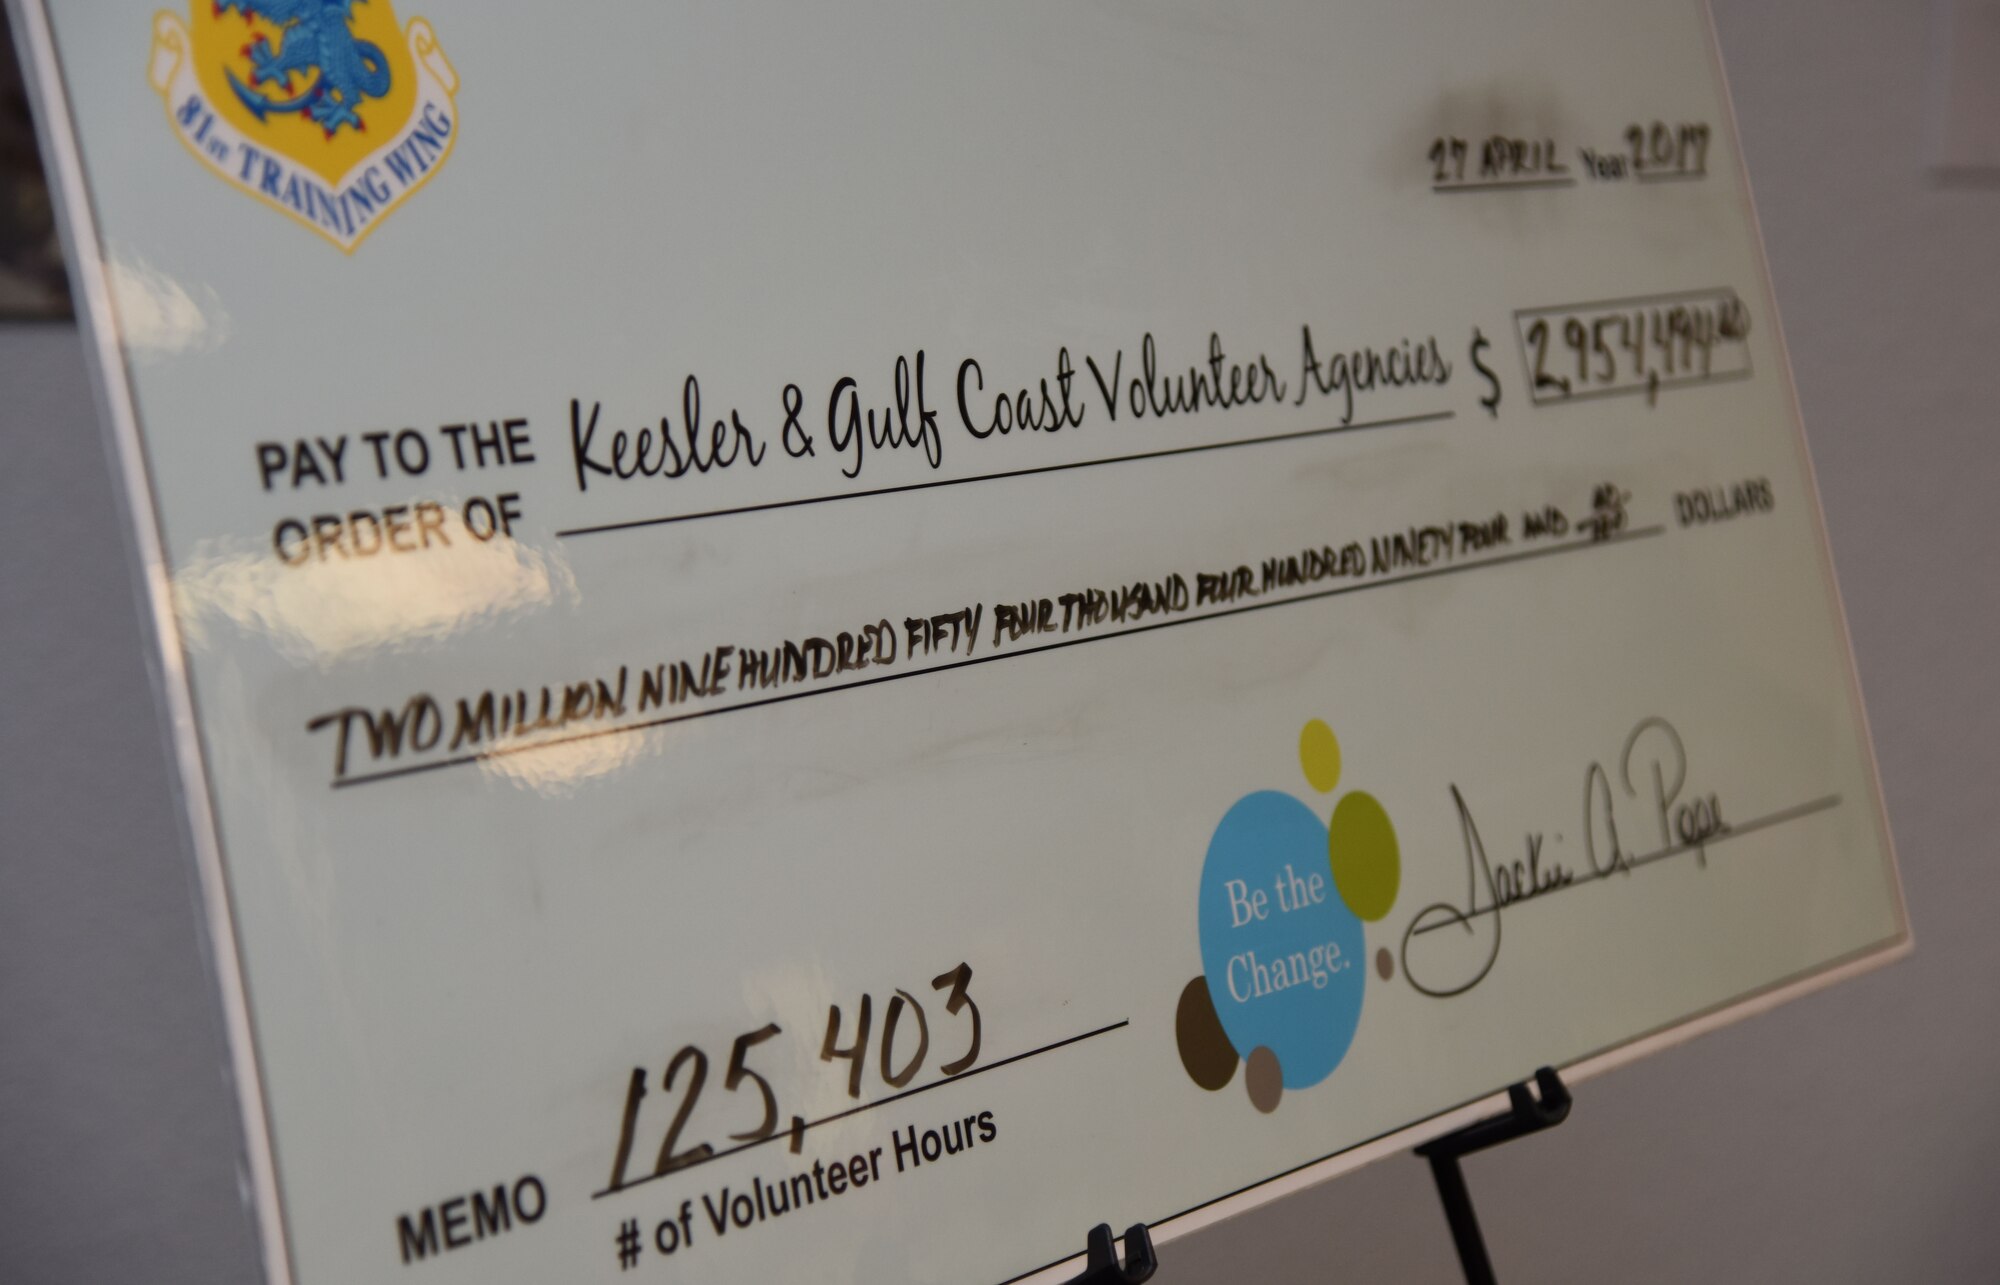 A mock check showing the value of Keesler and Gulf Coast volunteer hours donated in 2016 sits on display during the Annual Volunteer Recognition Ceremony in the Sablich Center April 27, 2017, on Keesler Air Force Base, Miss. The event recognized Keesler personnel, family member and retiree volunteers for their volunteer service in 2016. (U.S. Air Force photo by Kemberly Groue)